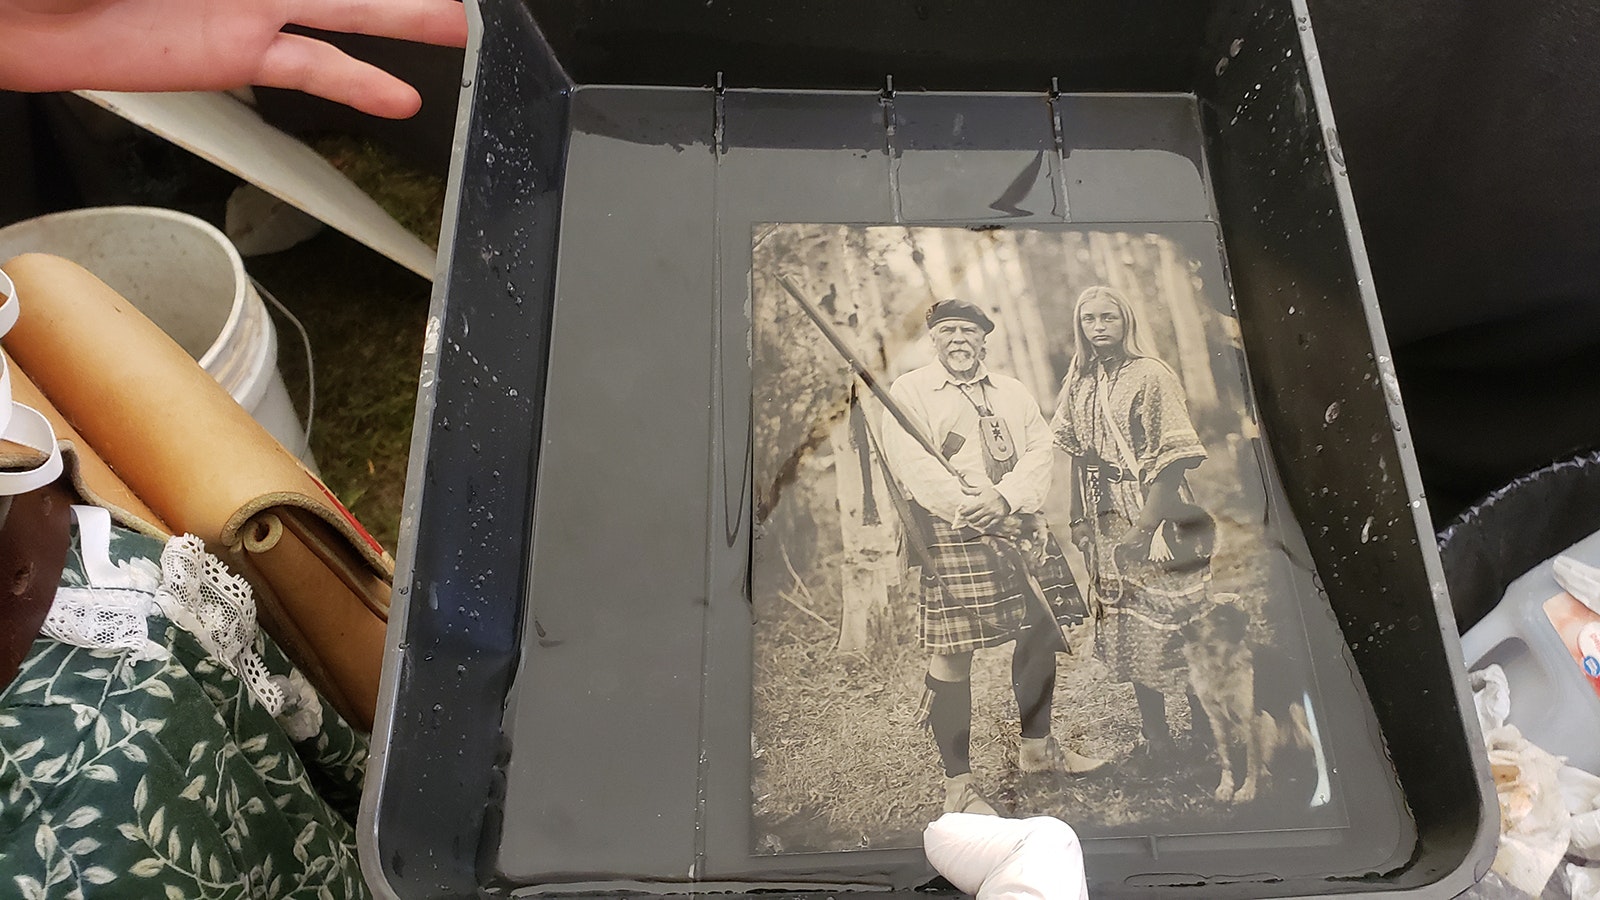 A tintype photographer was on hand for the Fort Bridger Rendezvous to take unique portraits of those participating in the event.